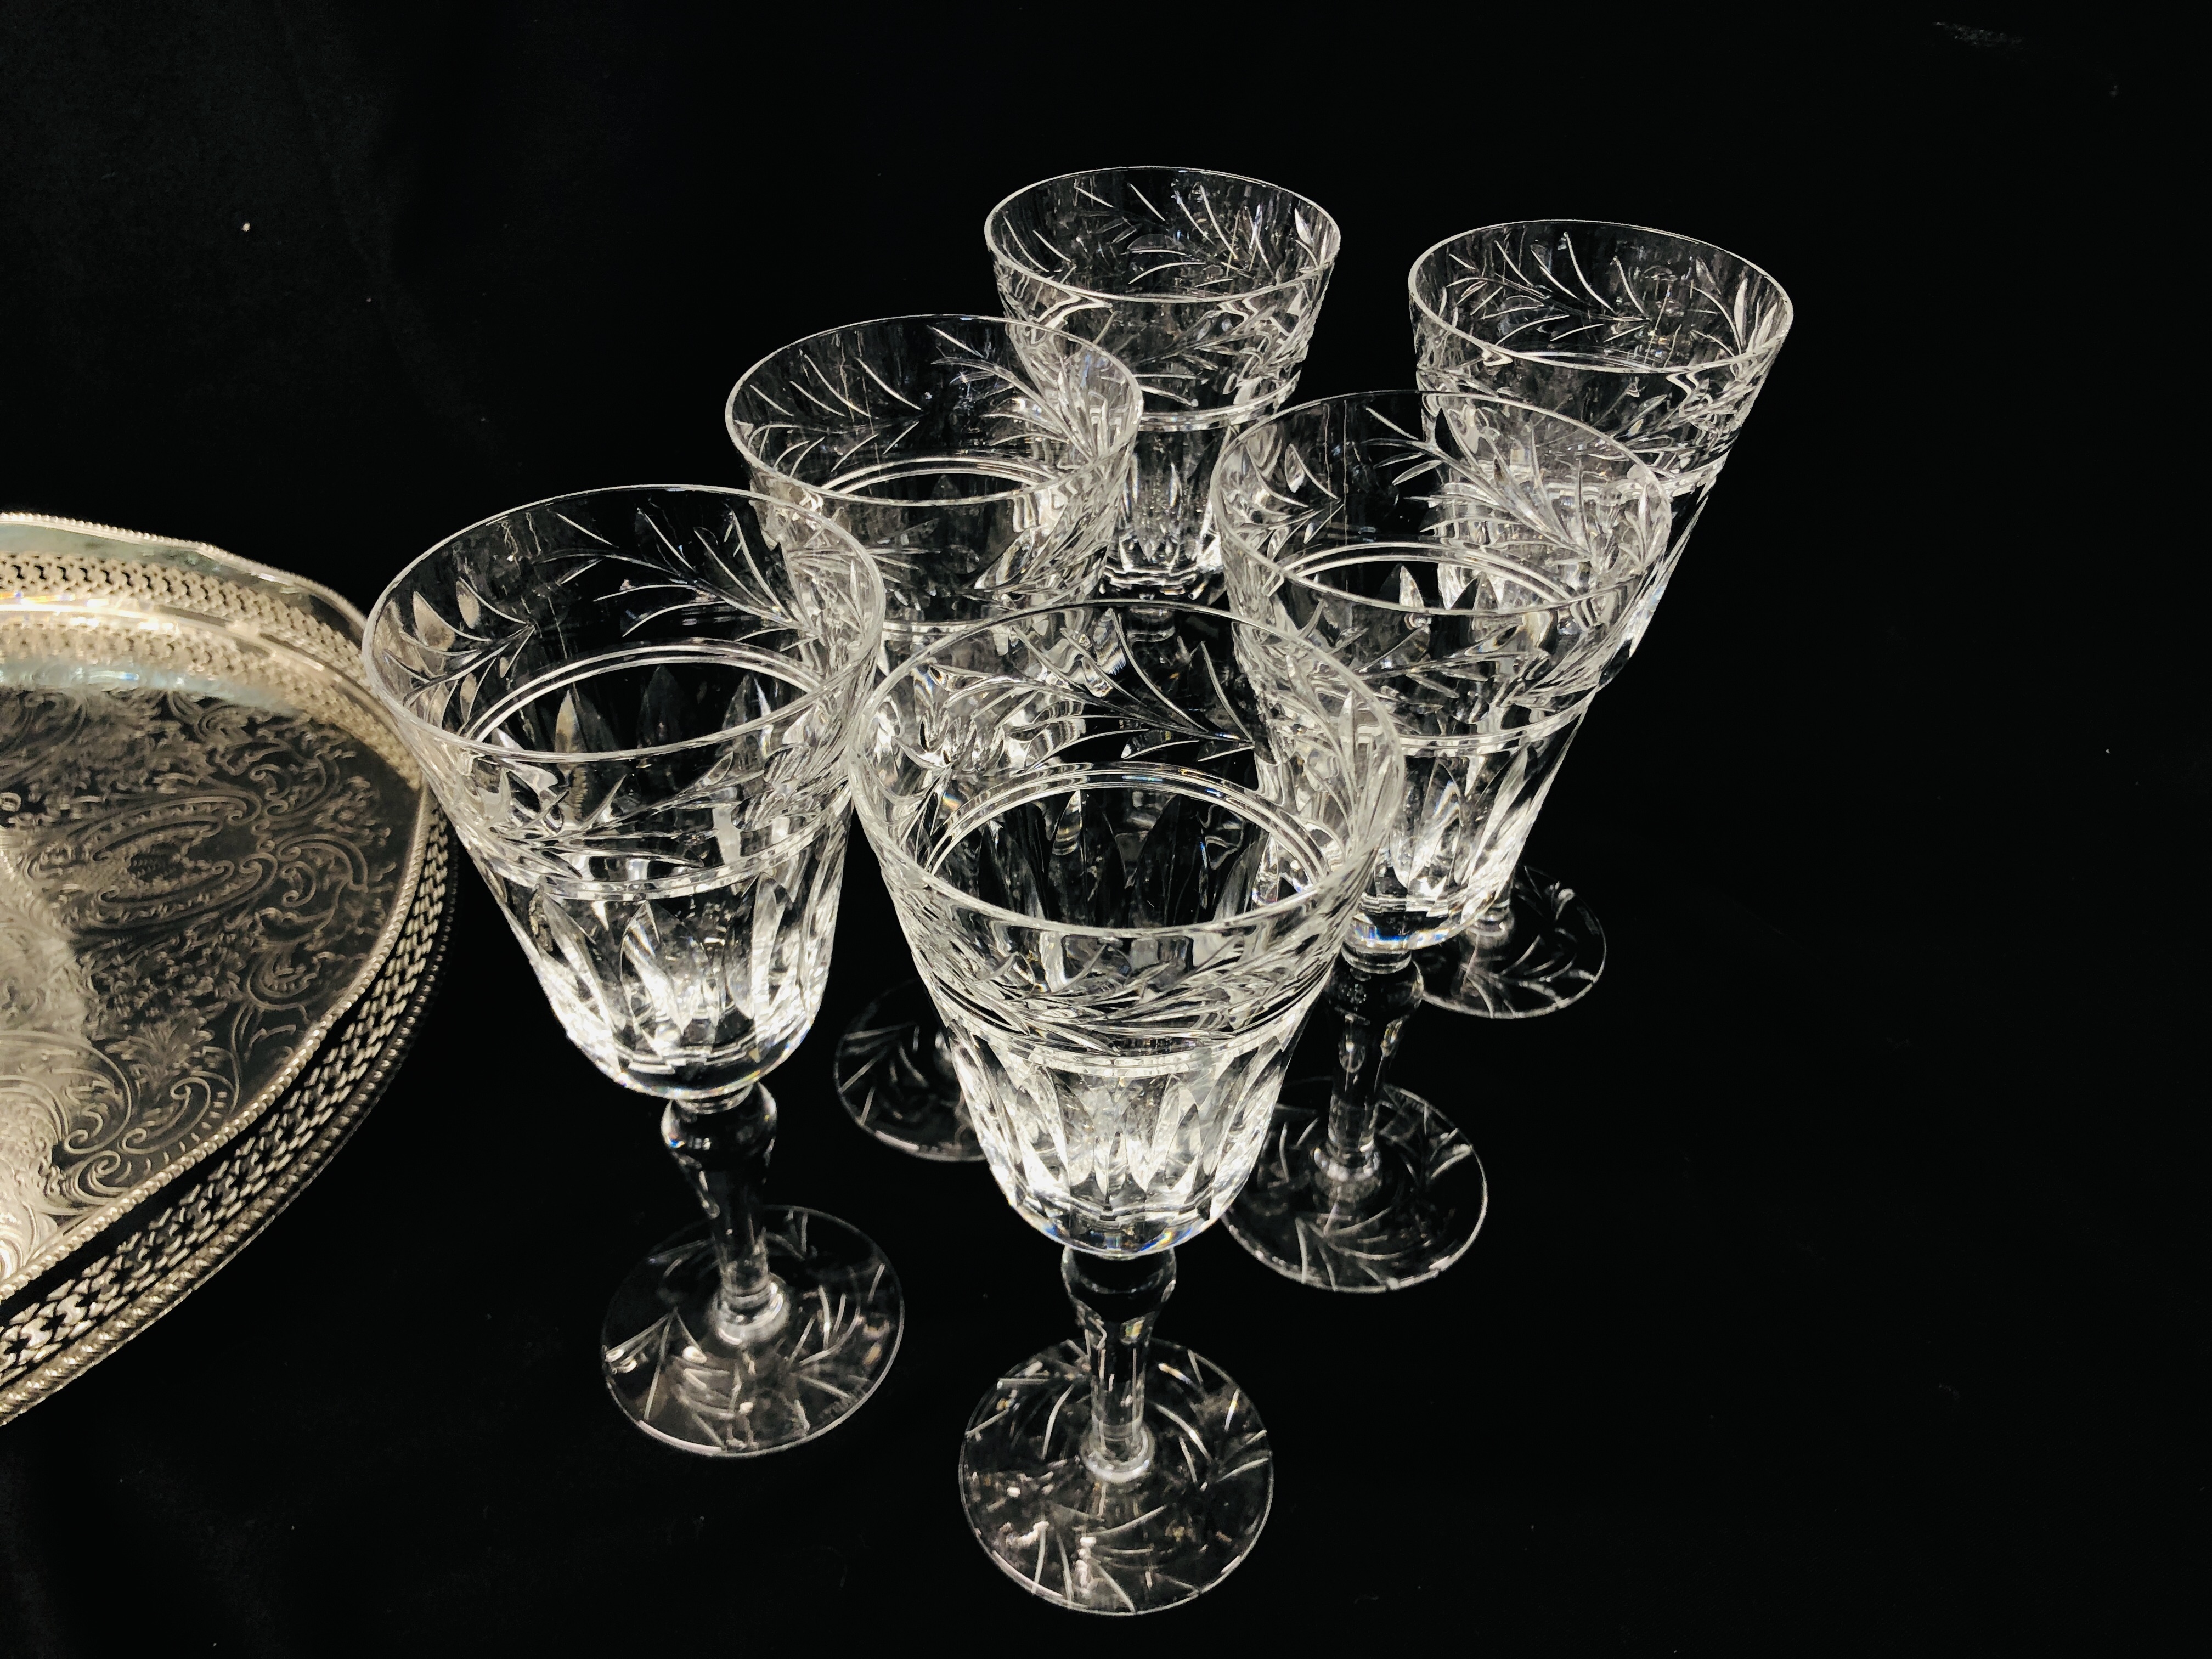 CIRCULAR SILVER PLATED TRAY MARKED "BARBER ELLIS" ALONG WITH A SET OF 6 STUART CUT GLASS WINE - Image 2 of 6